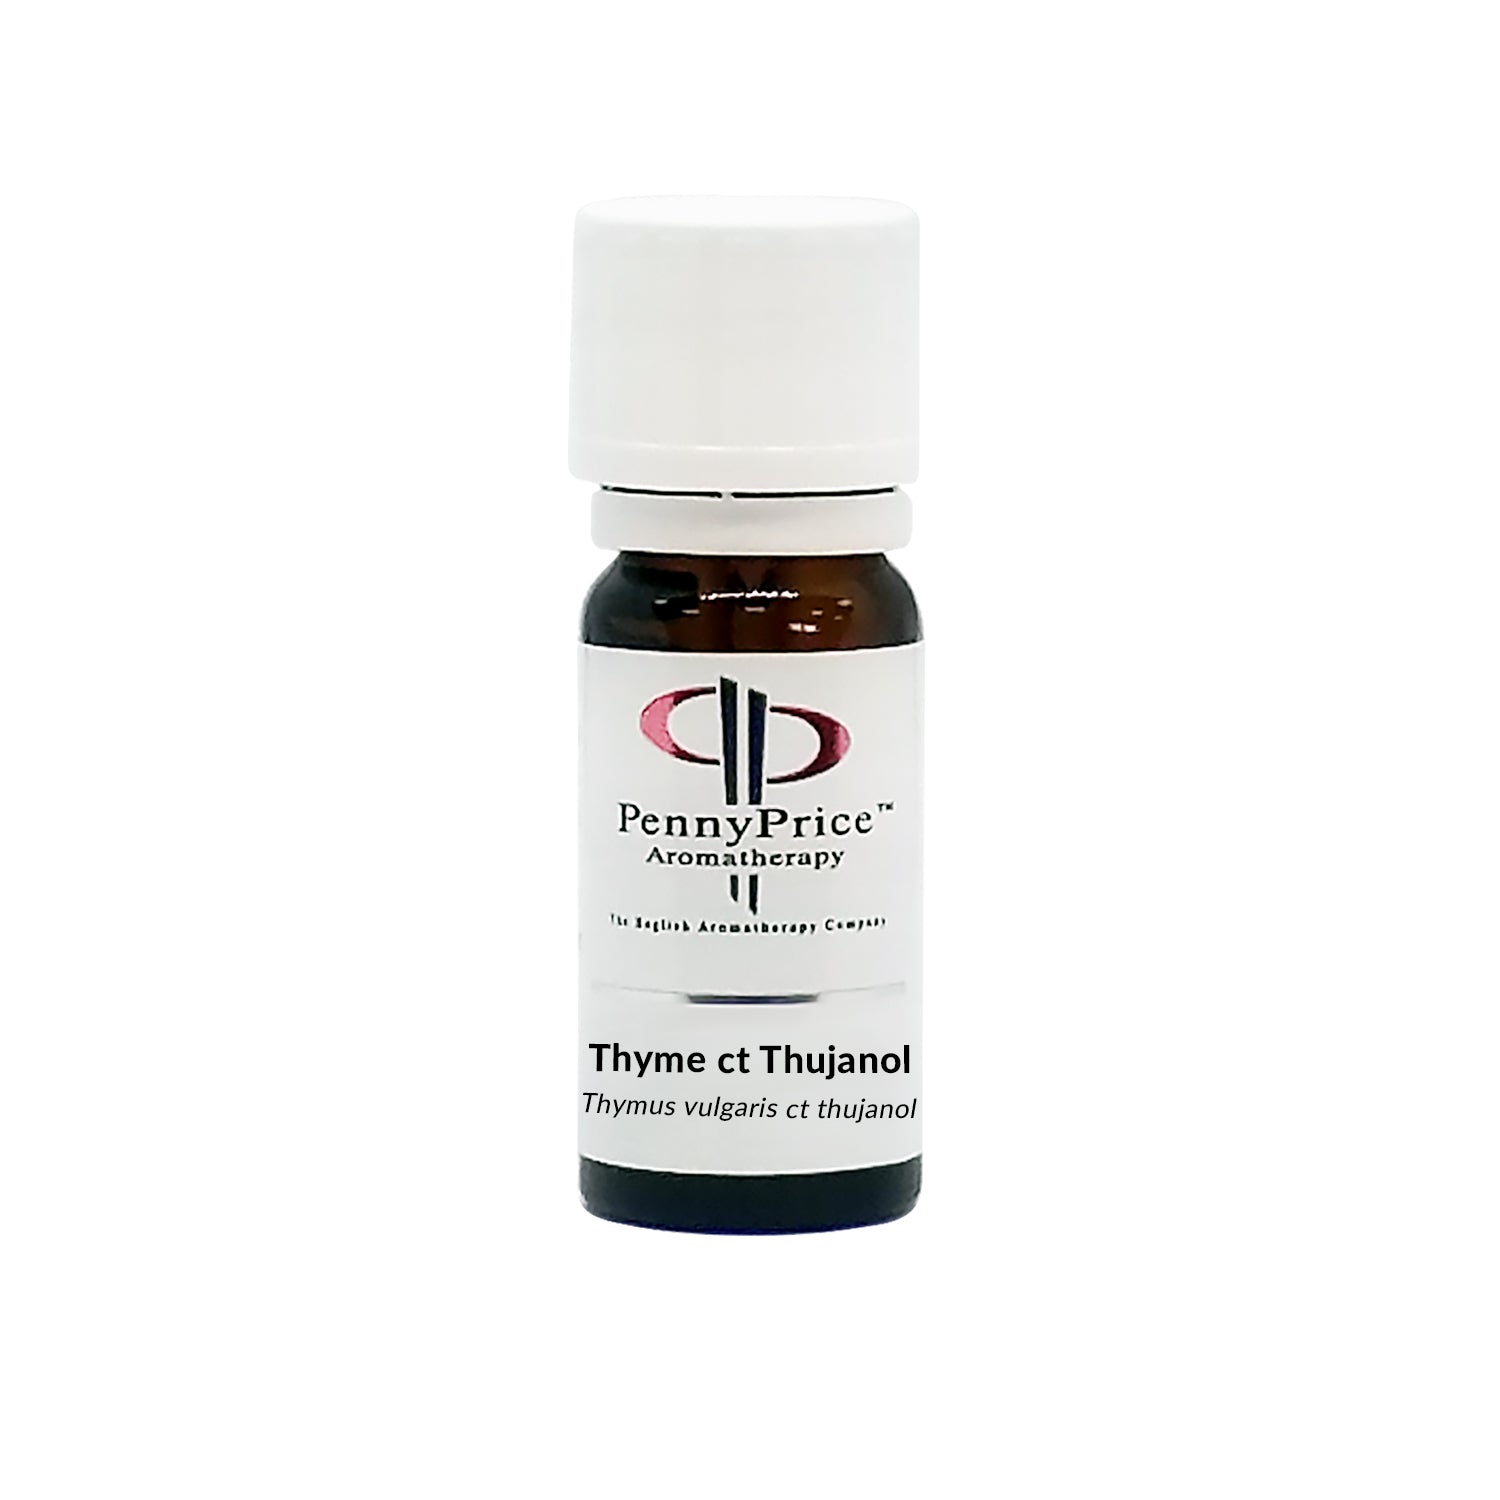 Thyme ct Thujanol Essential Oil